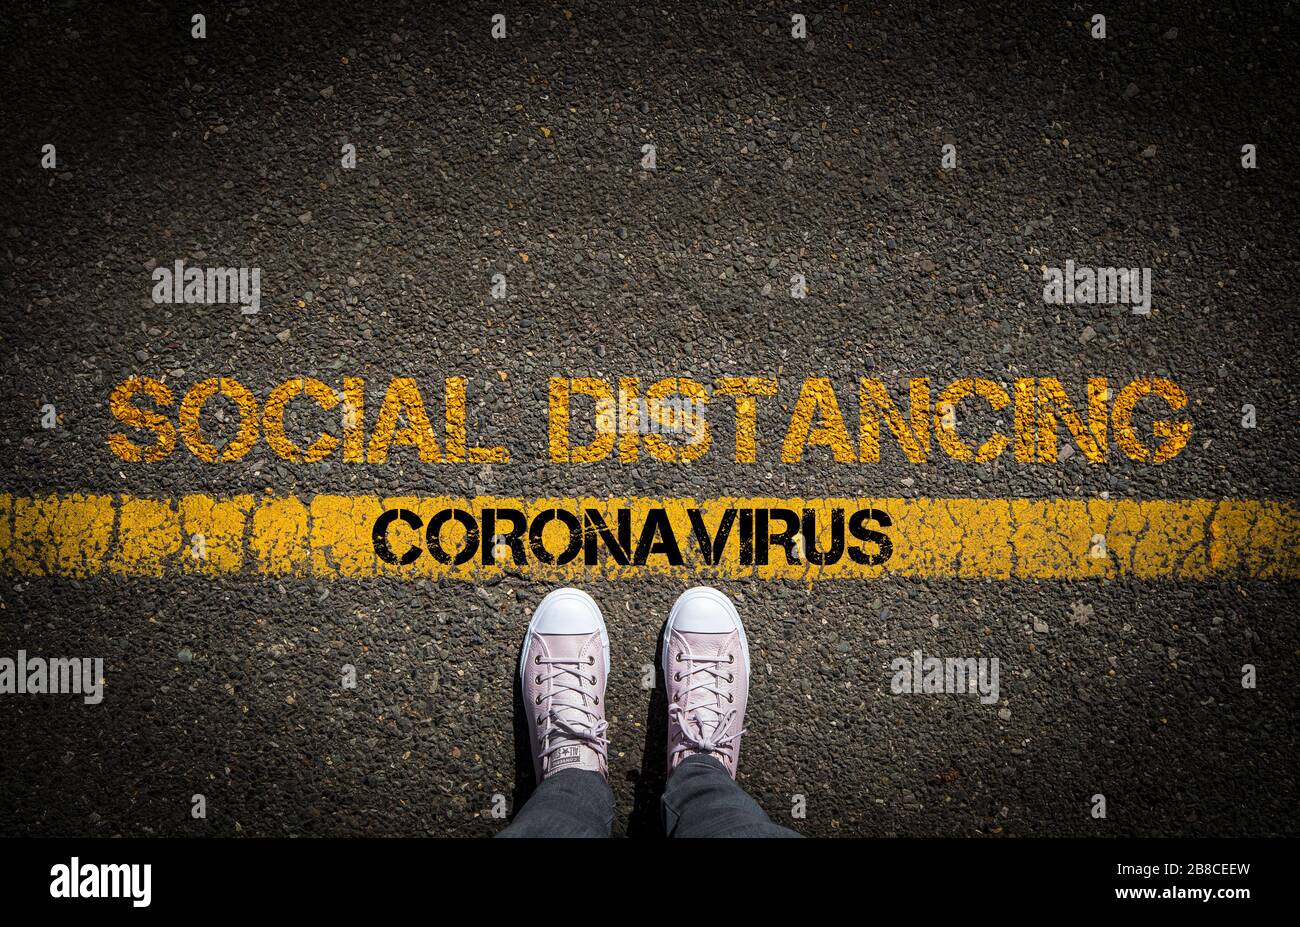 Social distancing to reduce the spread of Coronavirus, concept image. Stock Photo